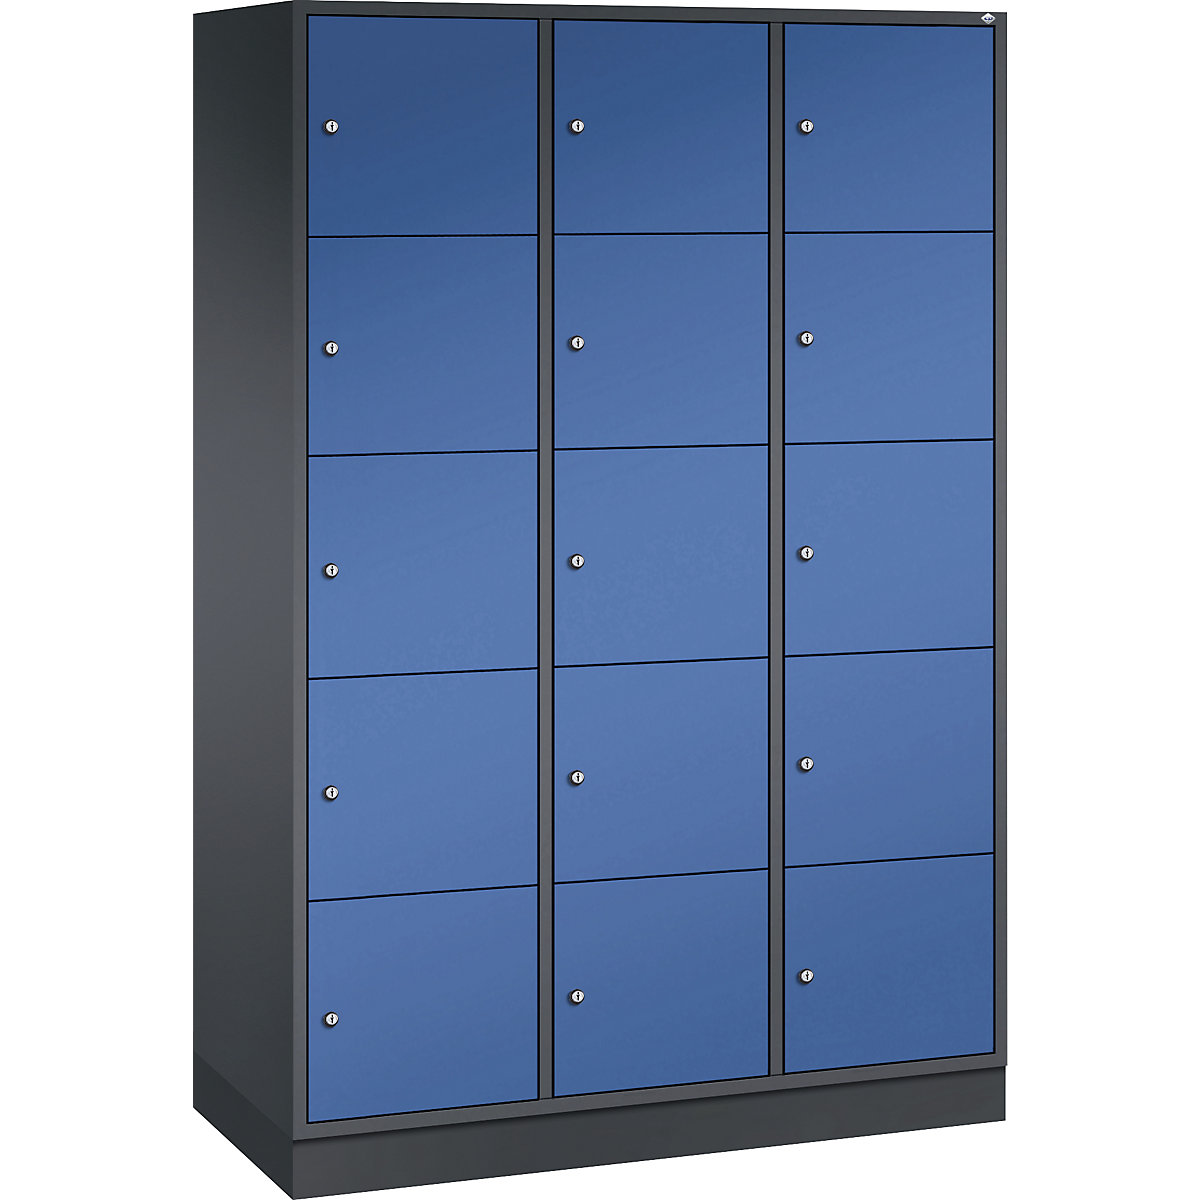 INTRO steel compartment locker, compartment height 345 mm – C+P, WxD 1220 x 500 mm, 15 compartments, black grey body, gentian blue doors